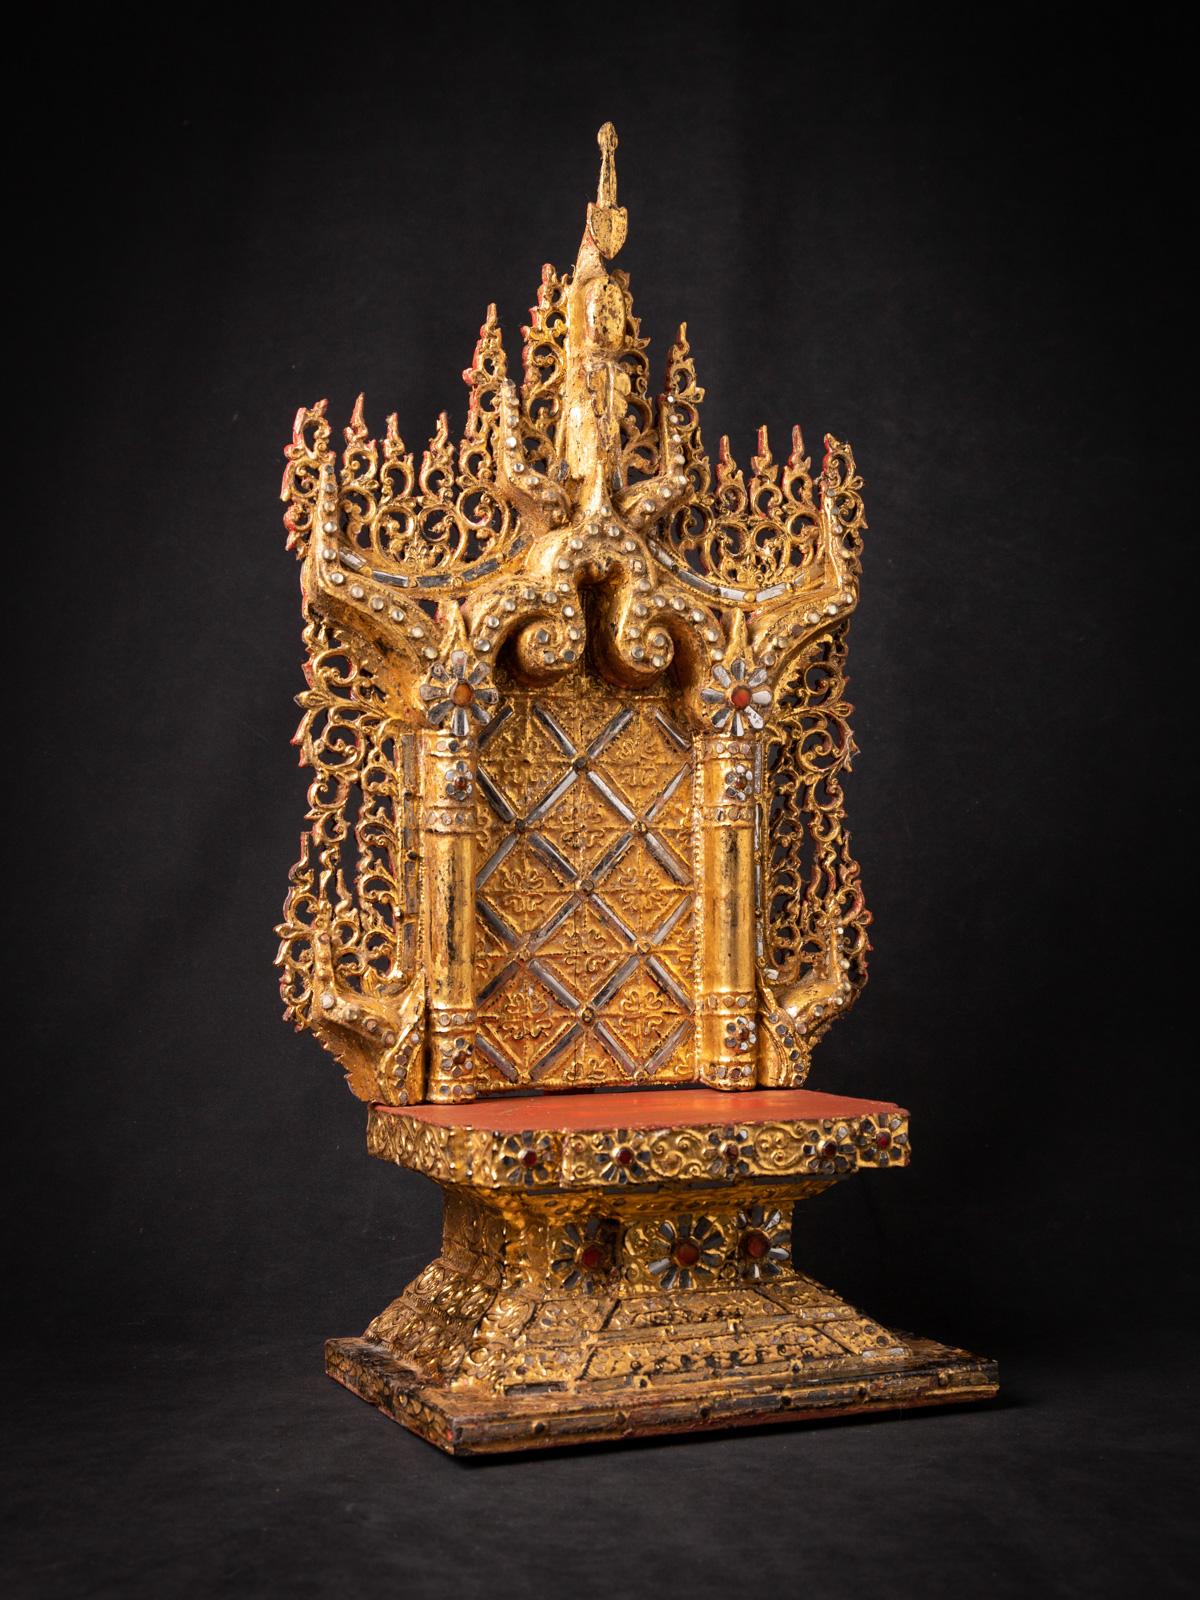 Introducing an Exquisite Antique Wooden Burmese Throne: A Majestic Masterpiece of Elegance and Heritage

Step into a realm of timeless grandeur with this magnificent antique Burmese throne. Crafted from the finest wood and adorned with the